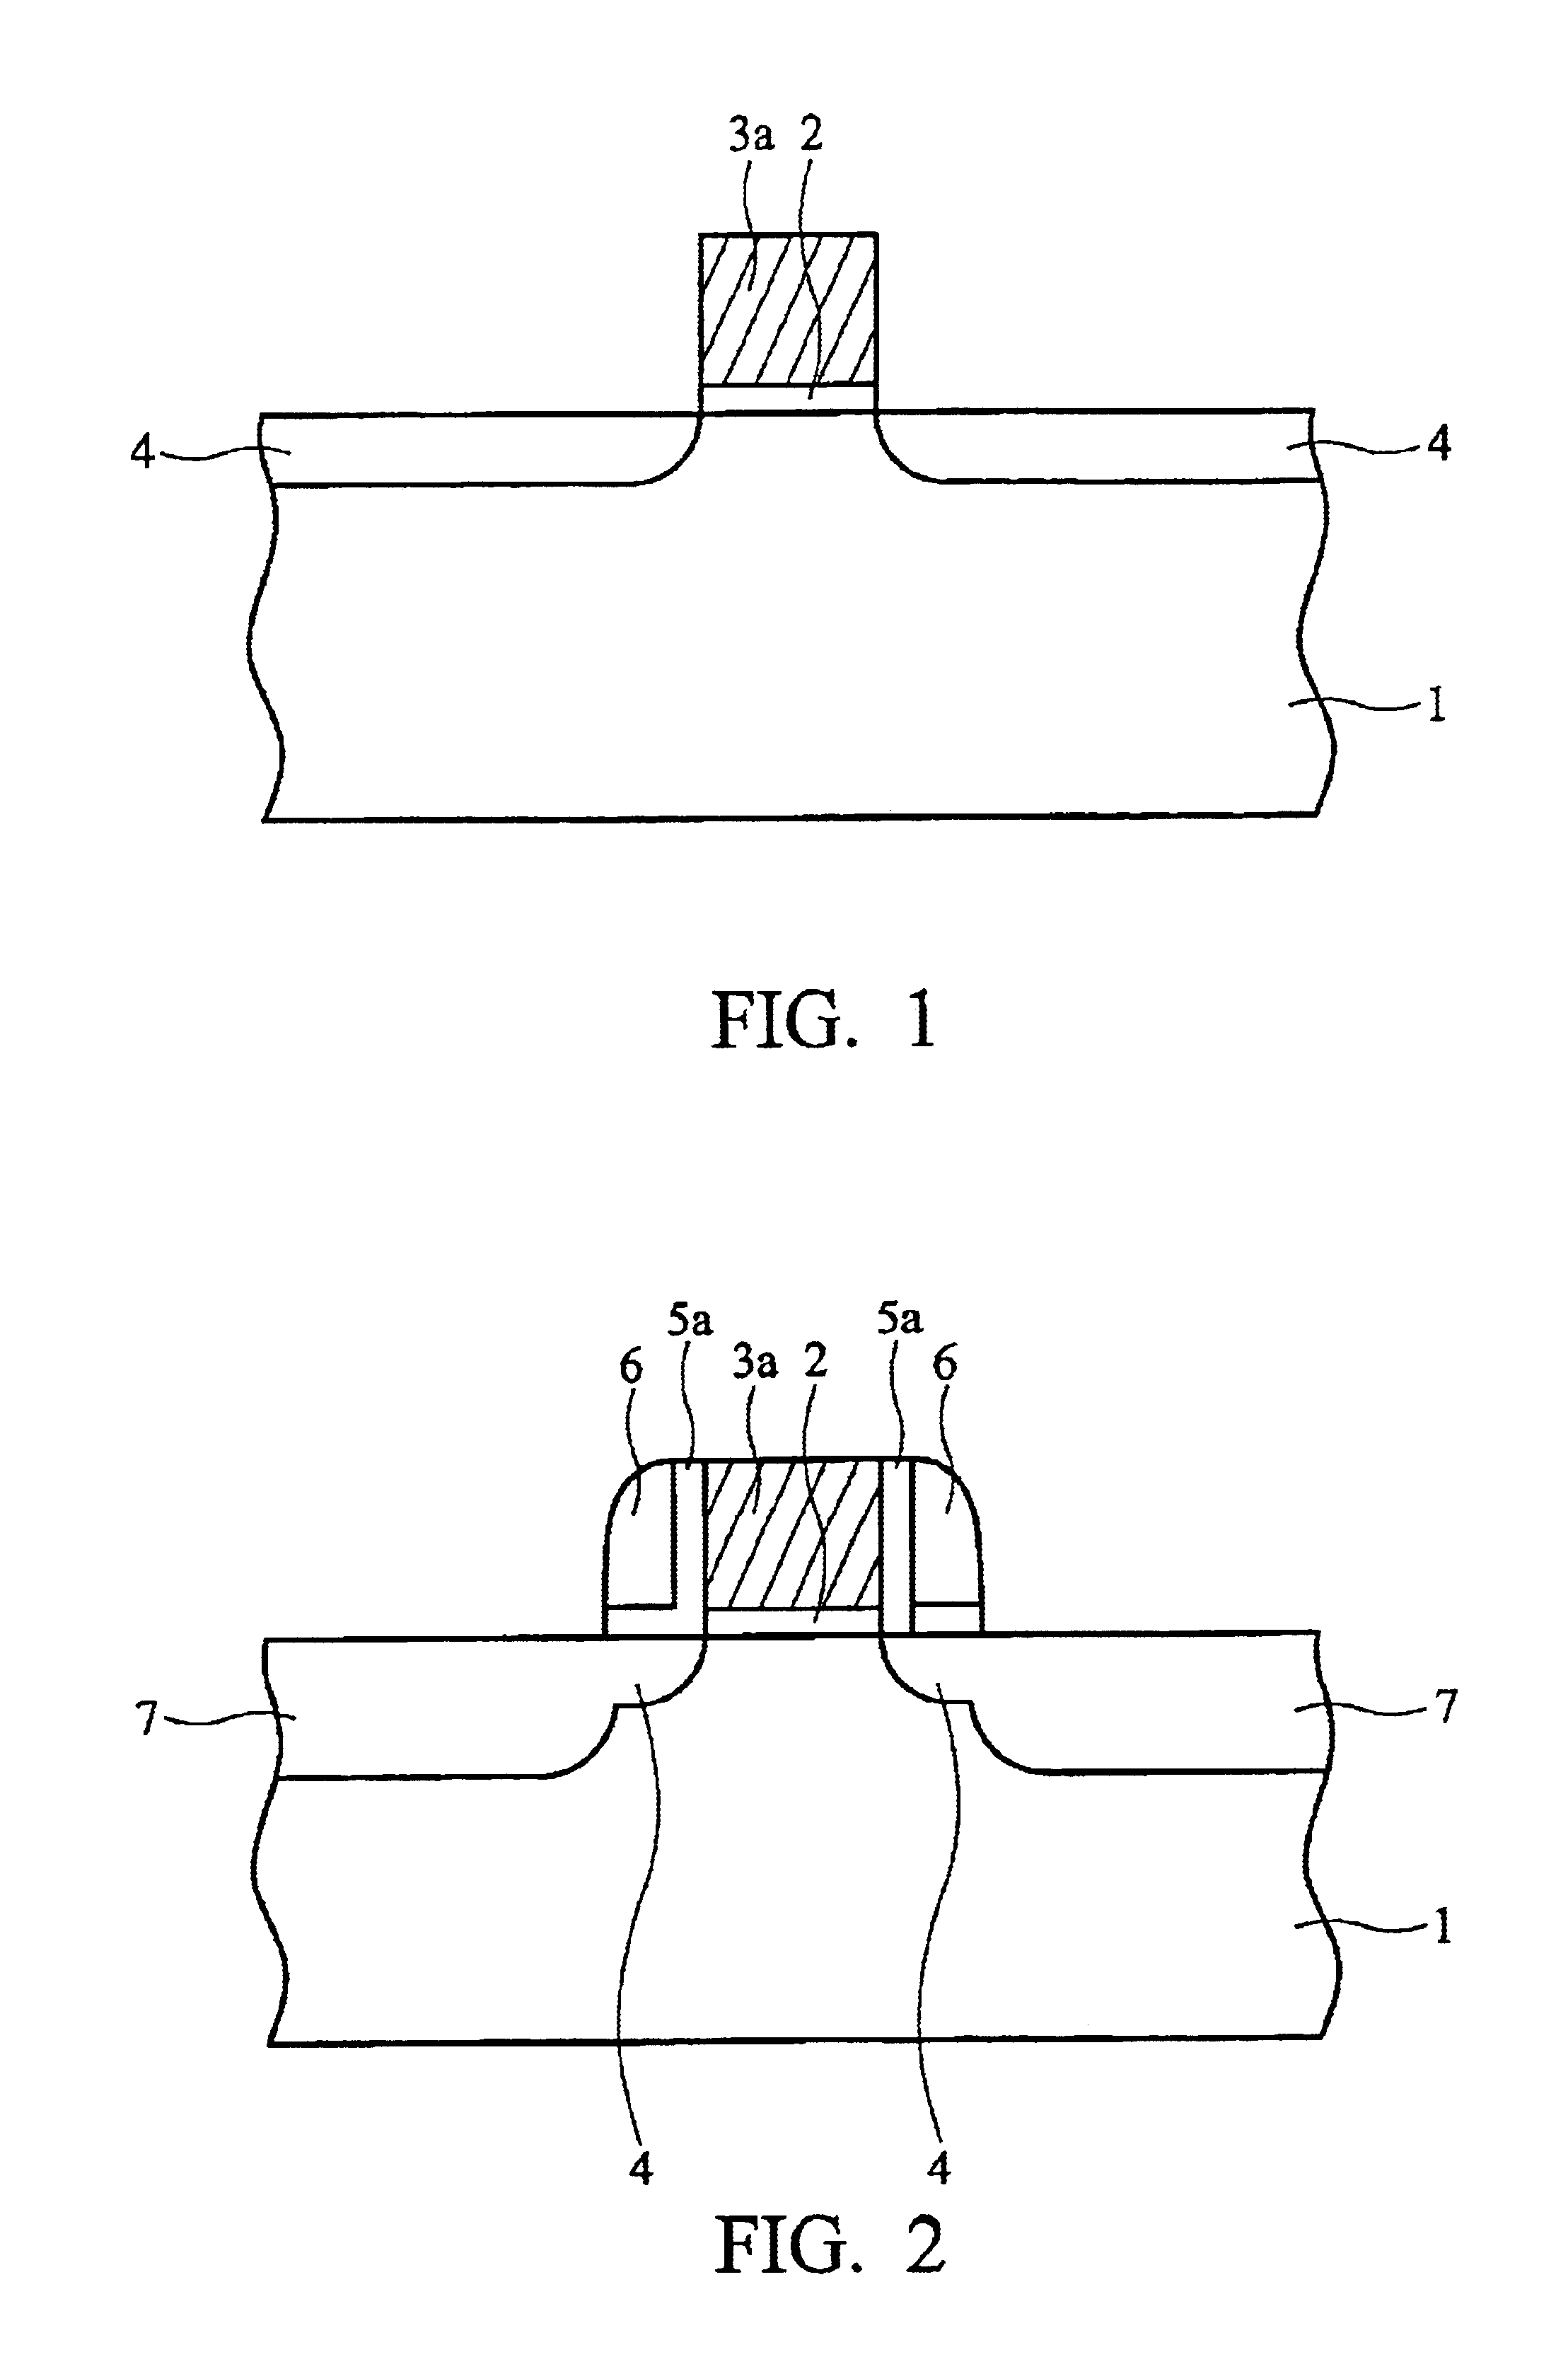 Method of fabricating a high performance MOSFET device featuring formation of an elevated source/drain region